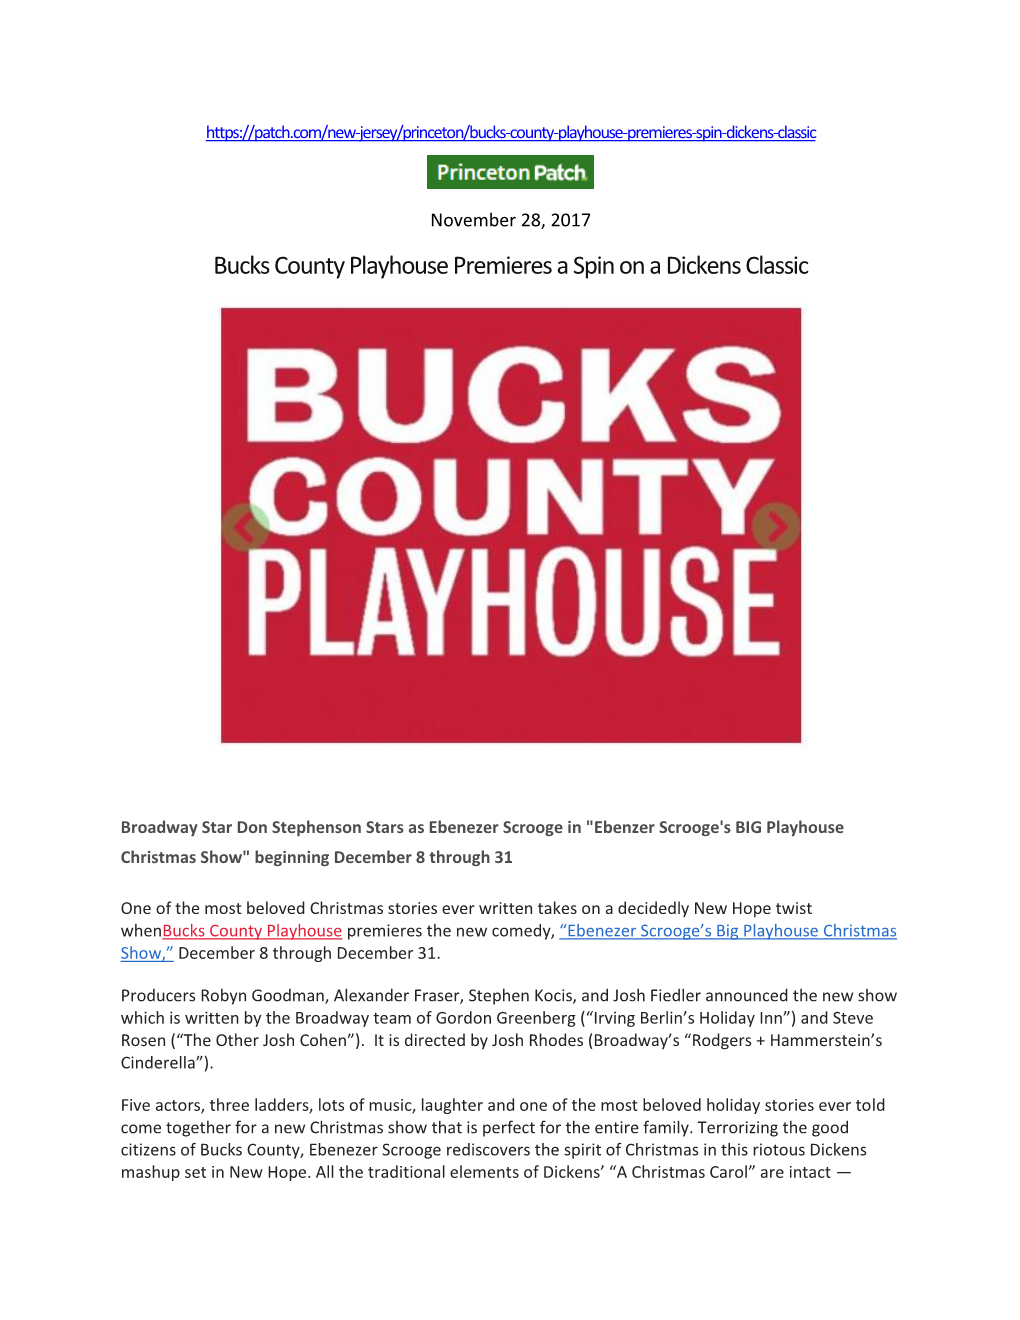 Bucks County Playhouse Premieres a Spin on a Dickens Classic